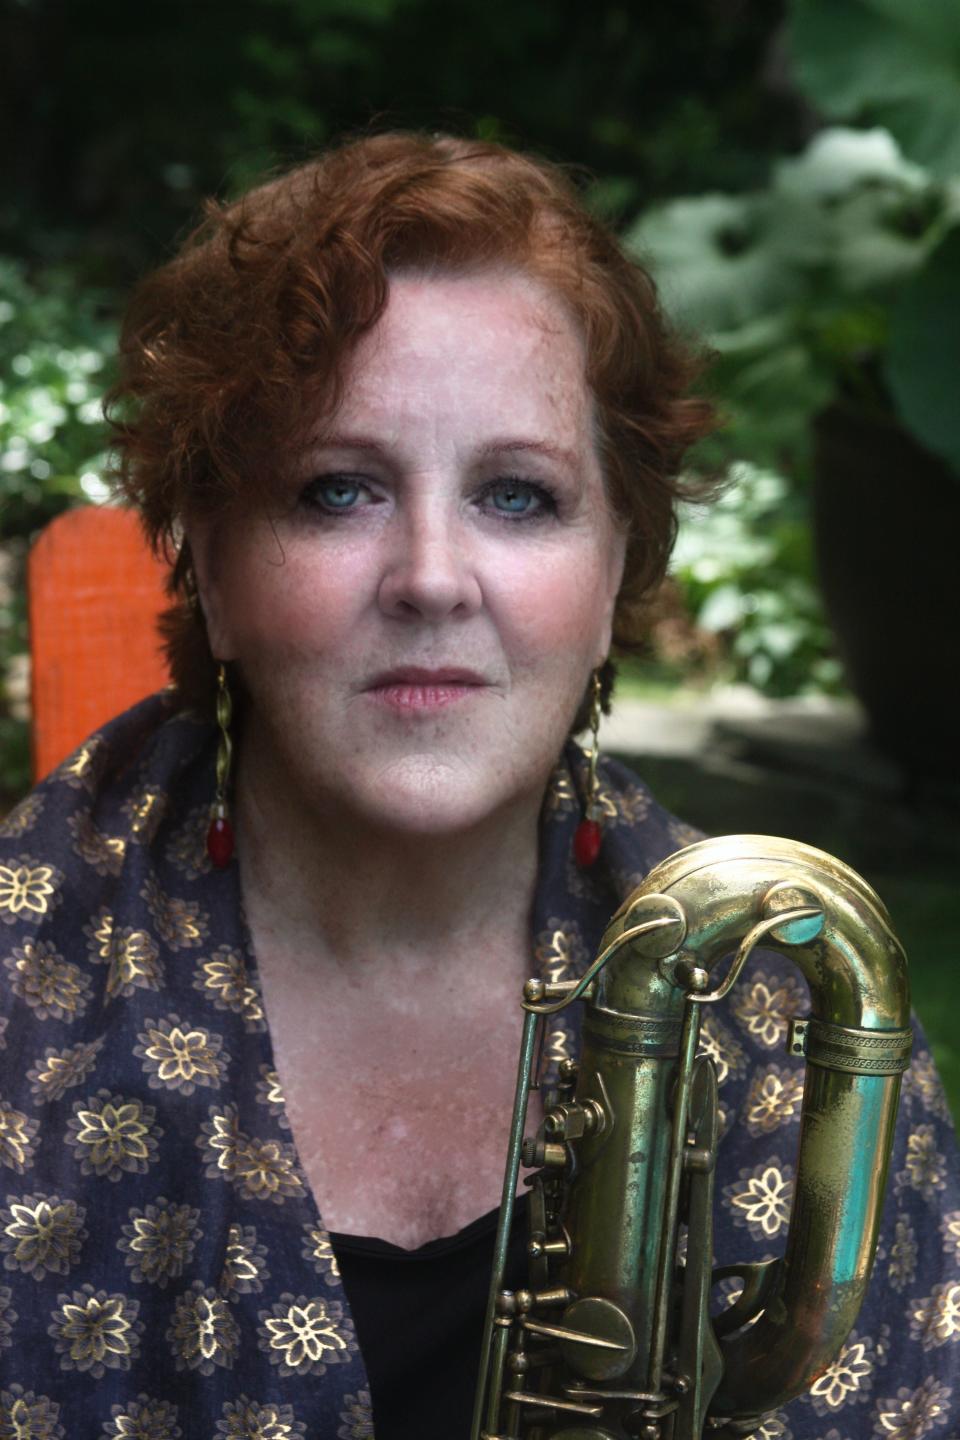 Baritone saxophone player Claire Daly